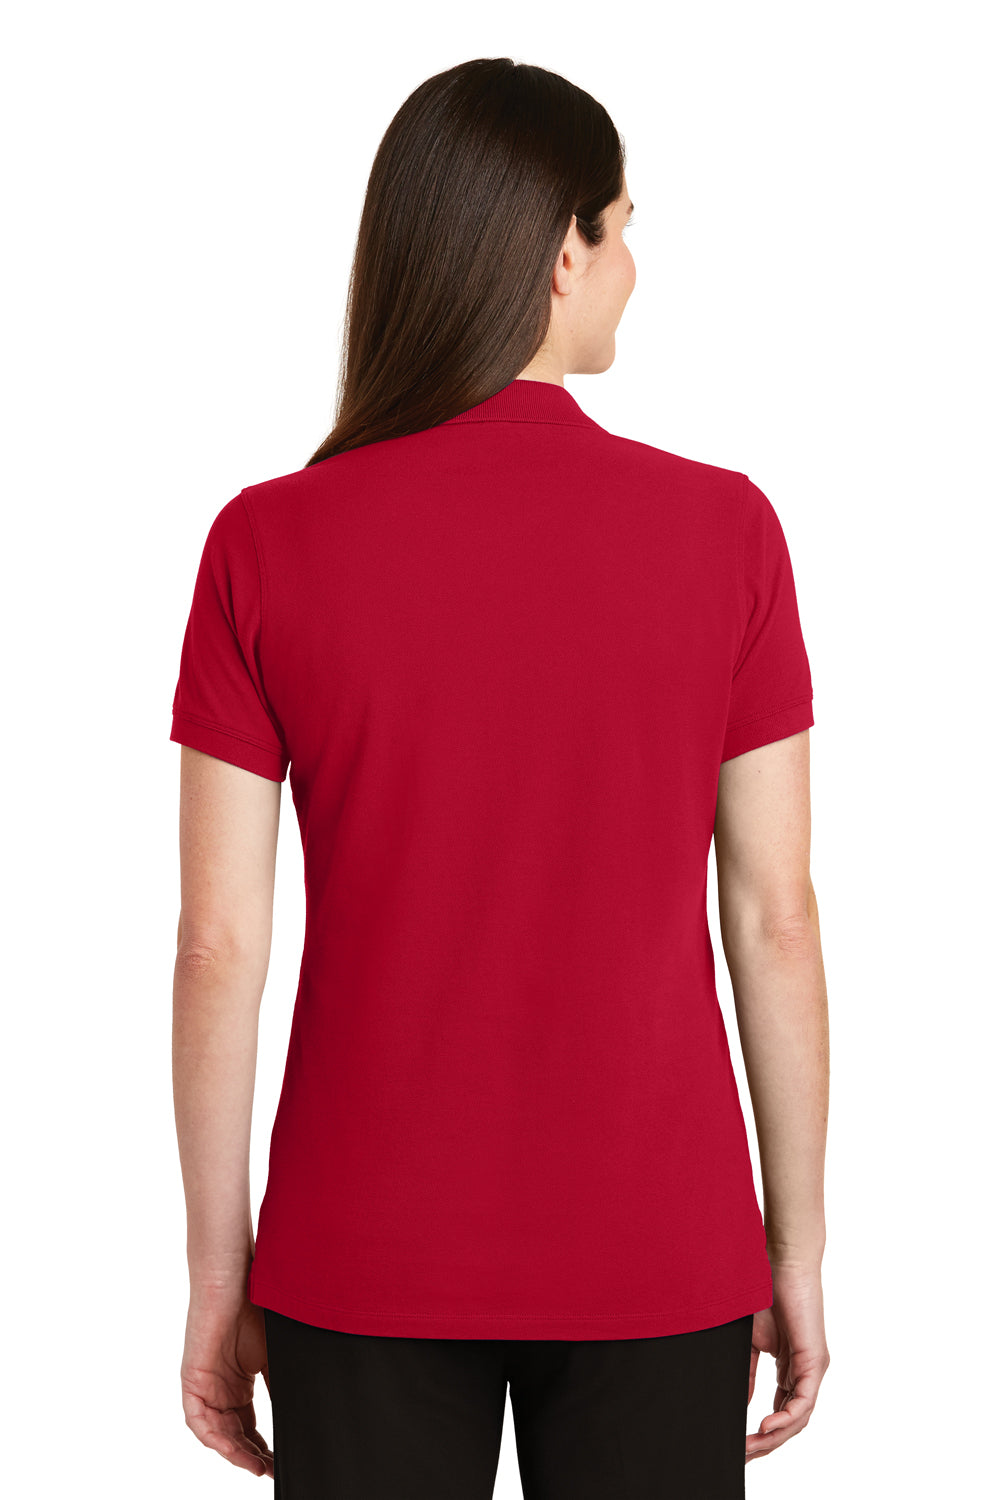 Port Authority LK8000 Womens Wrinkle Resistant Short Sleeve Polo Shirt Red Back